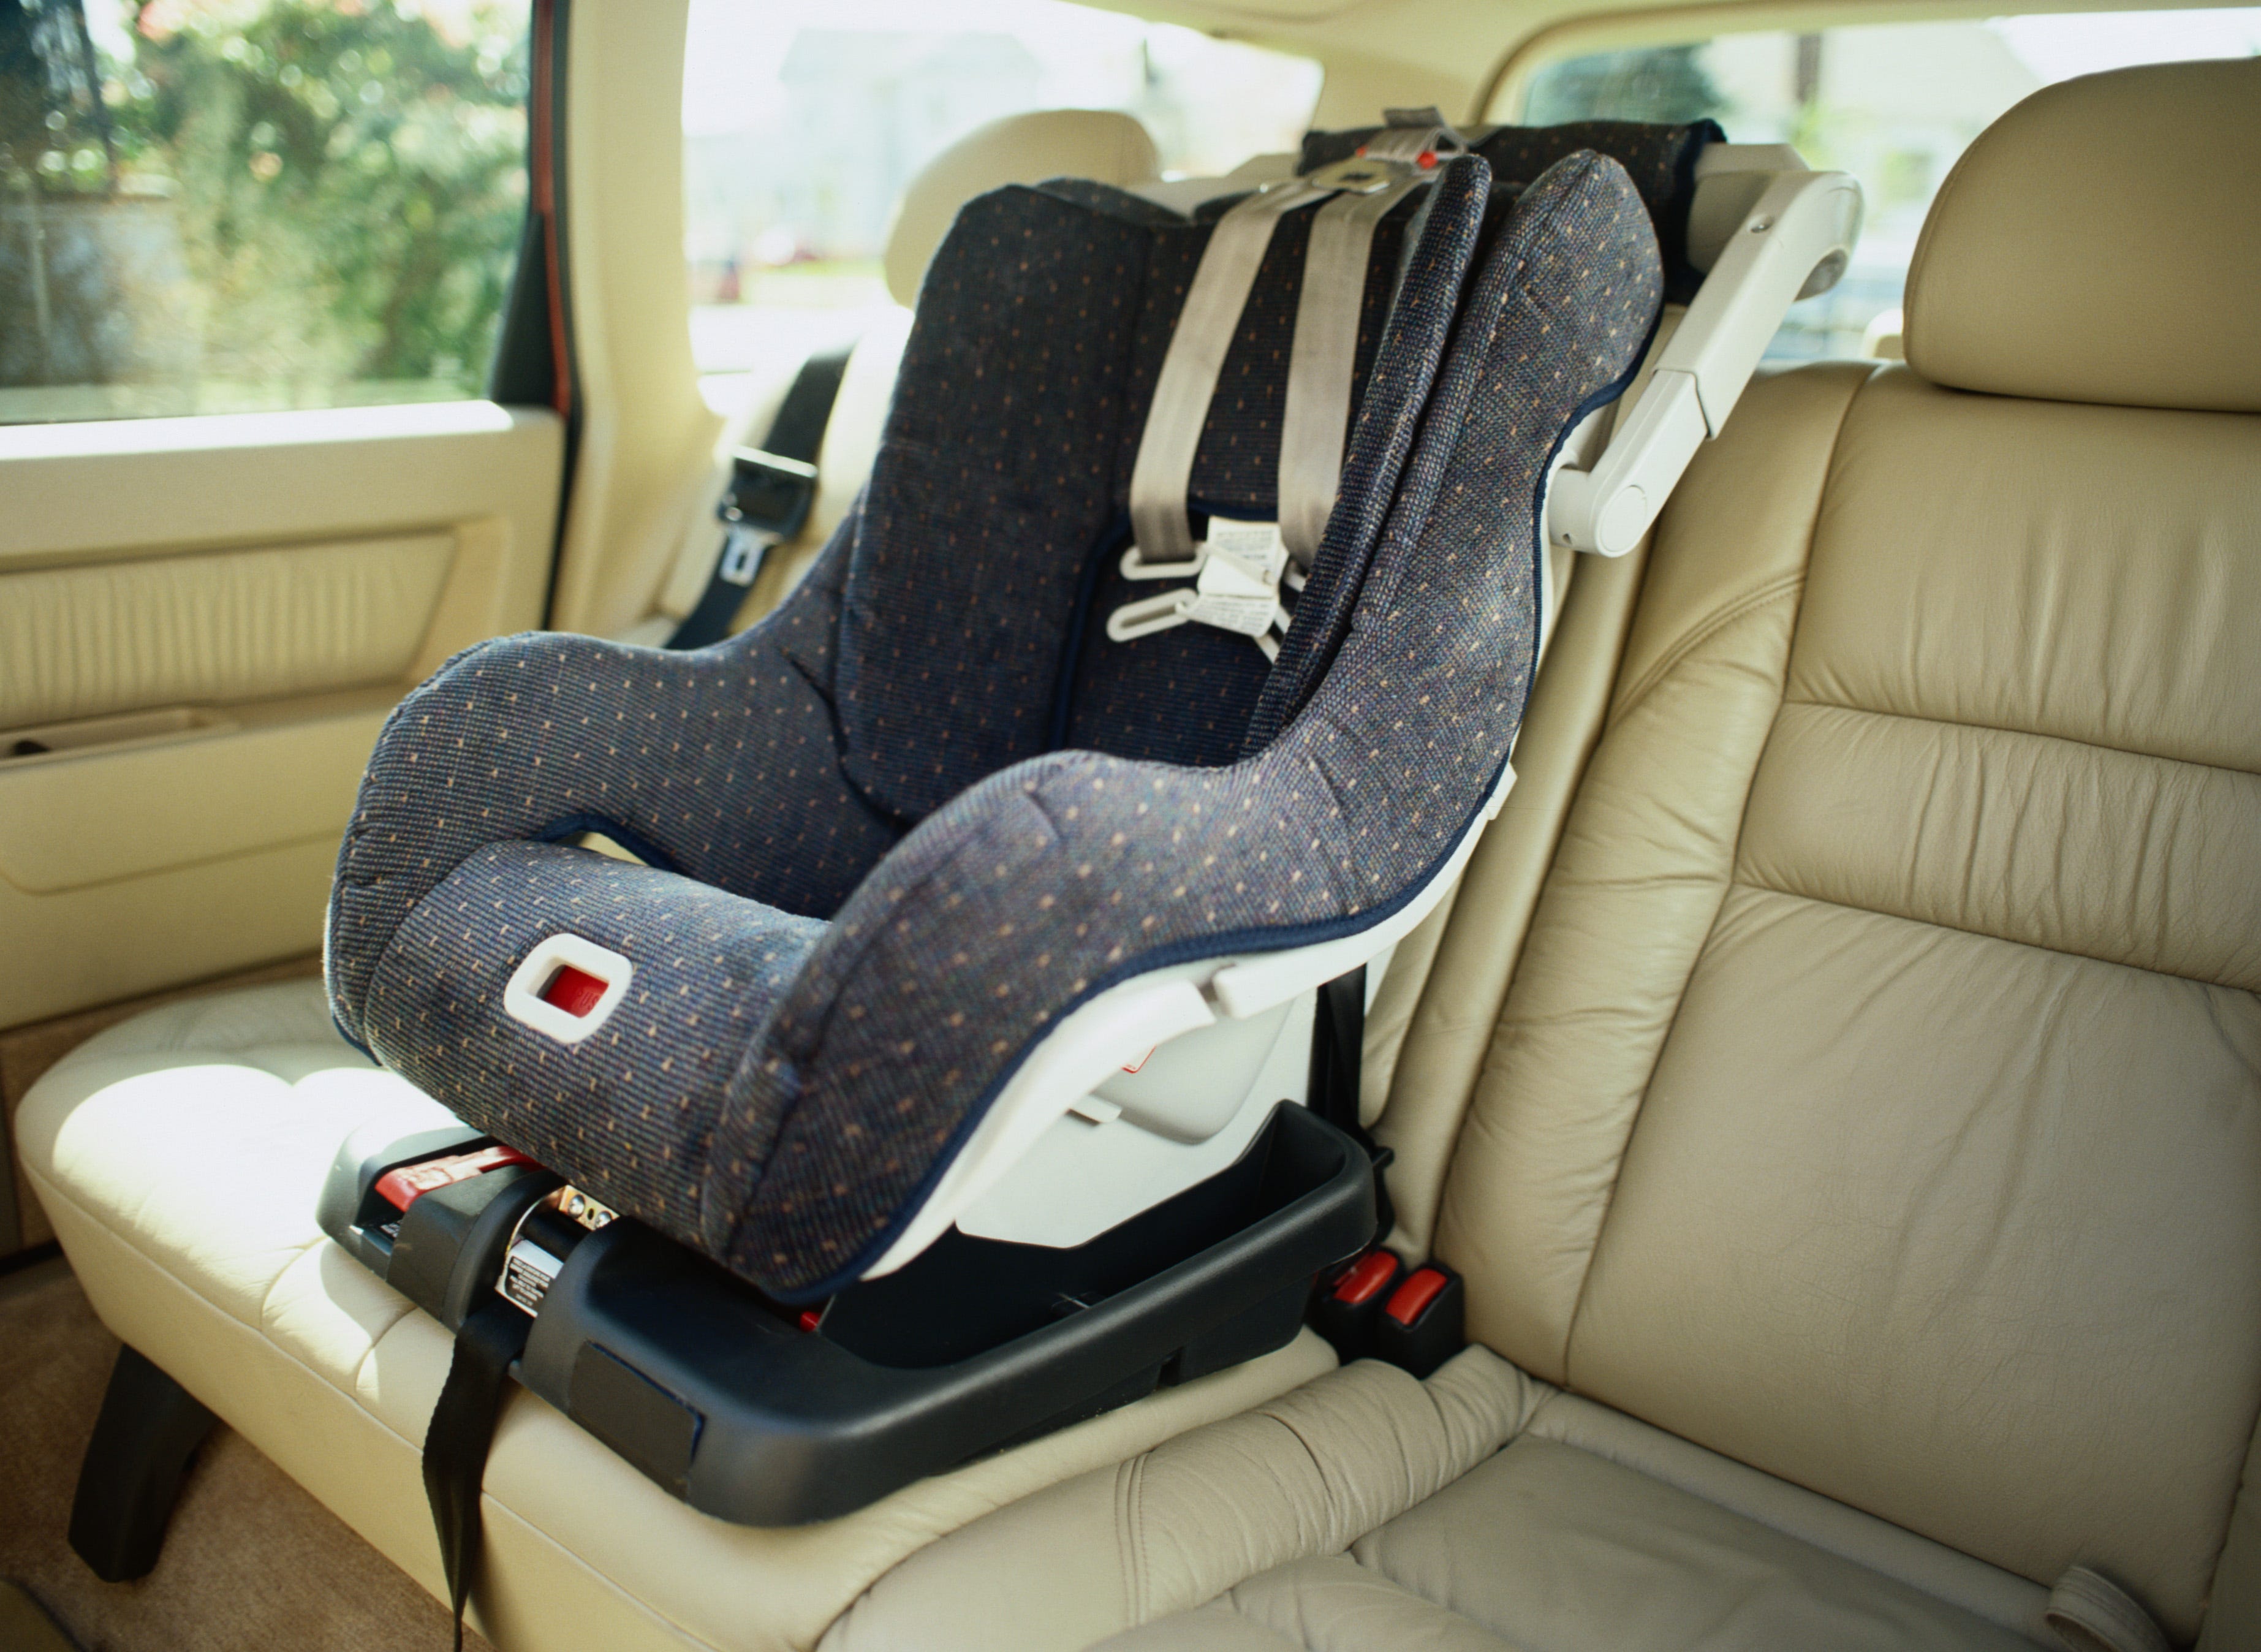 How to donate used car seats to save 